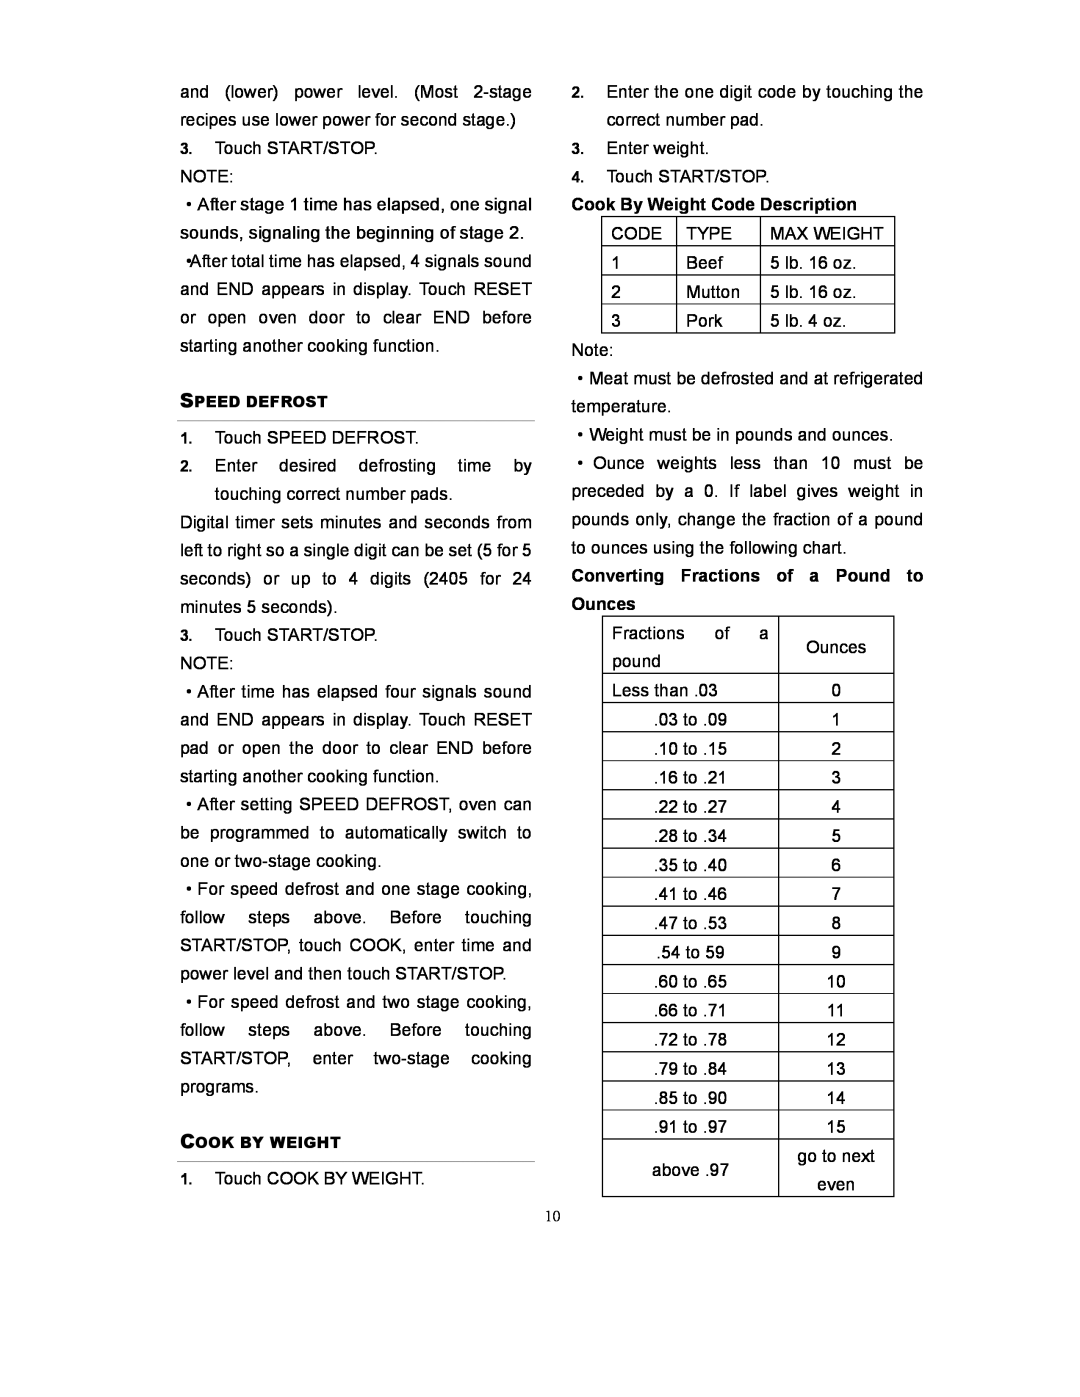 Kenmore 87039 owner manual Cook By Weight Code Description, Converting Fractions of a Pound to Ounces 